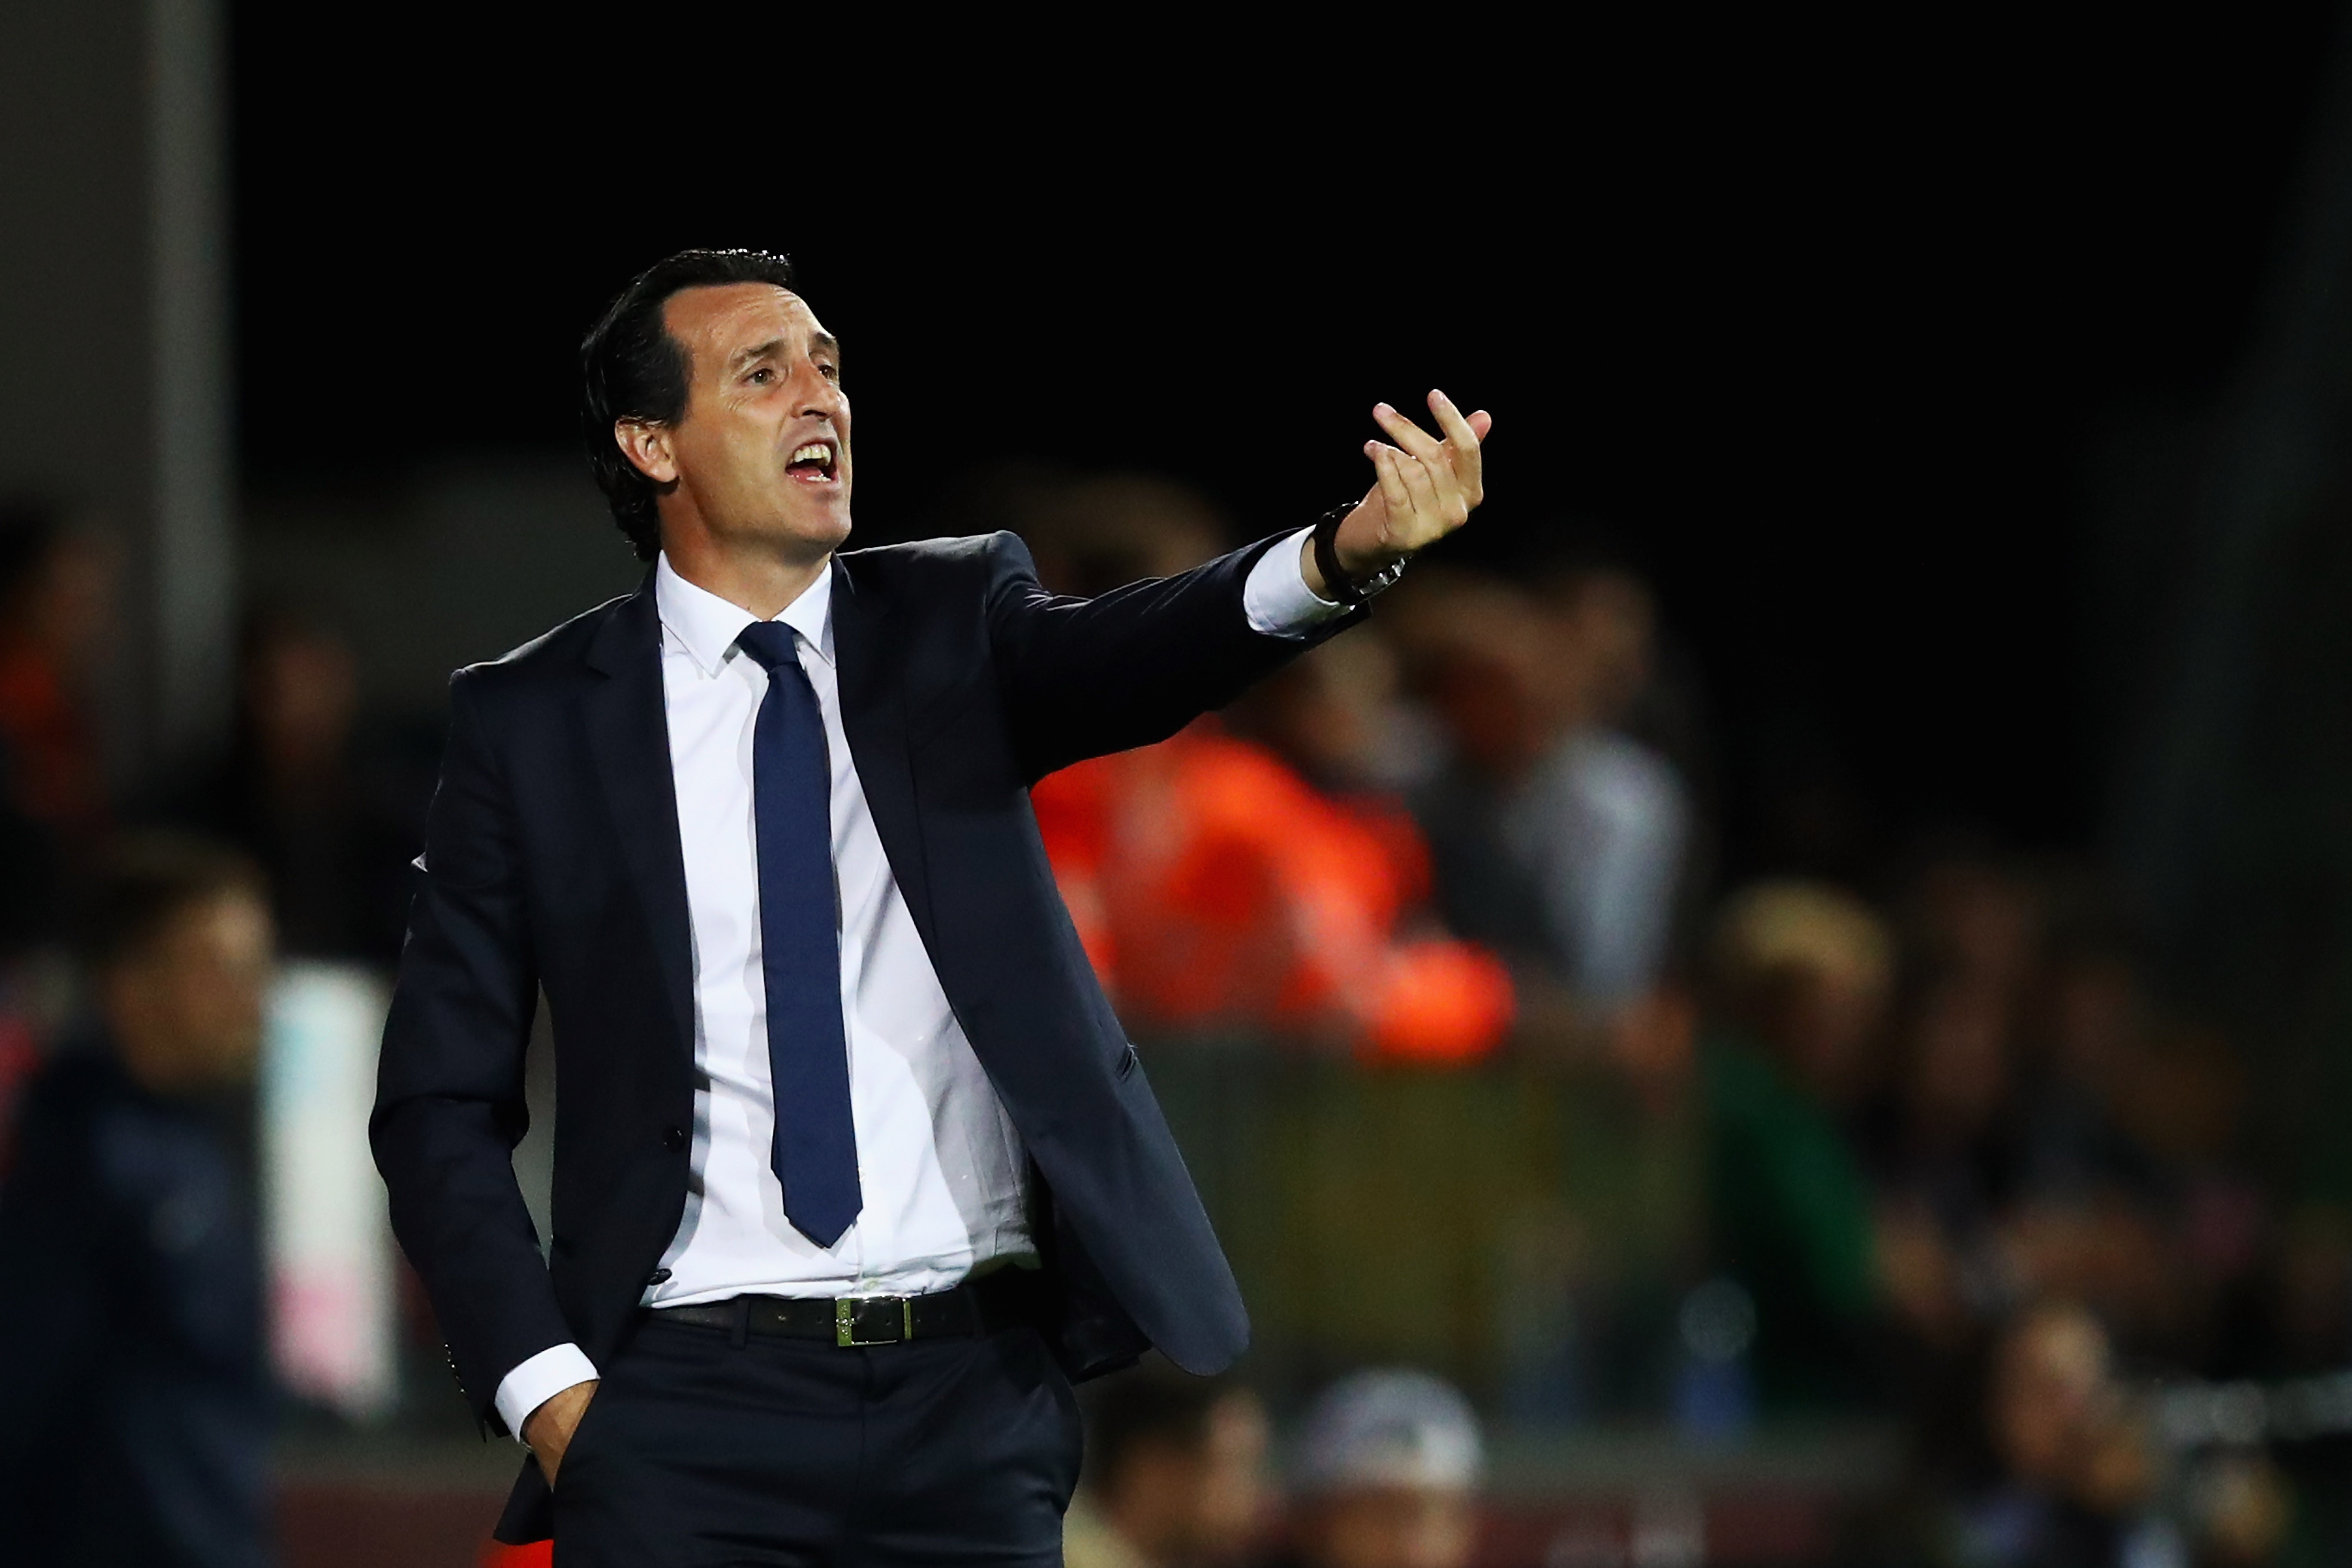 METZ, FRANCE - SEPTEMBER 08:  PSG Manager / Head Coach, Unai Emery is pictured during the Ligue 1 match between Metz and Paris Saint Germain or PSG held at Stade Saint-Symphorien  on September 8, 2017 in Metz, France.  (Photo by Dean Mouhtaropoulos/Getty Images)